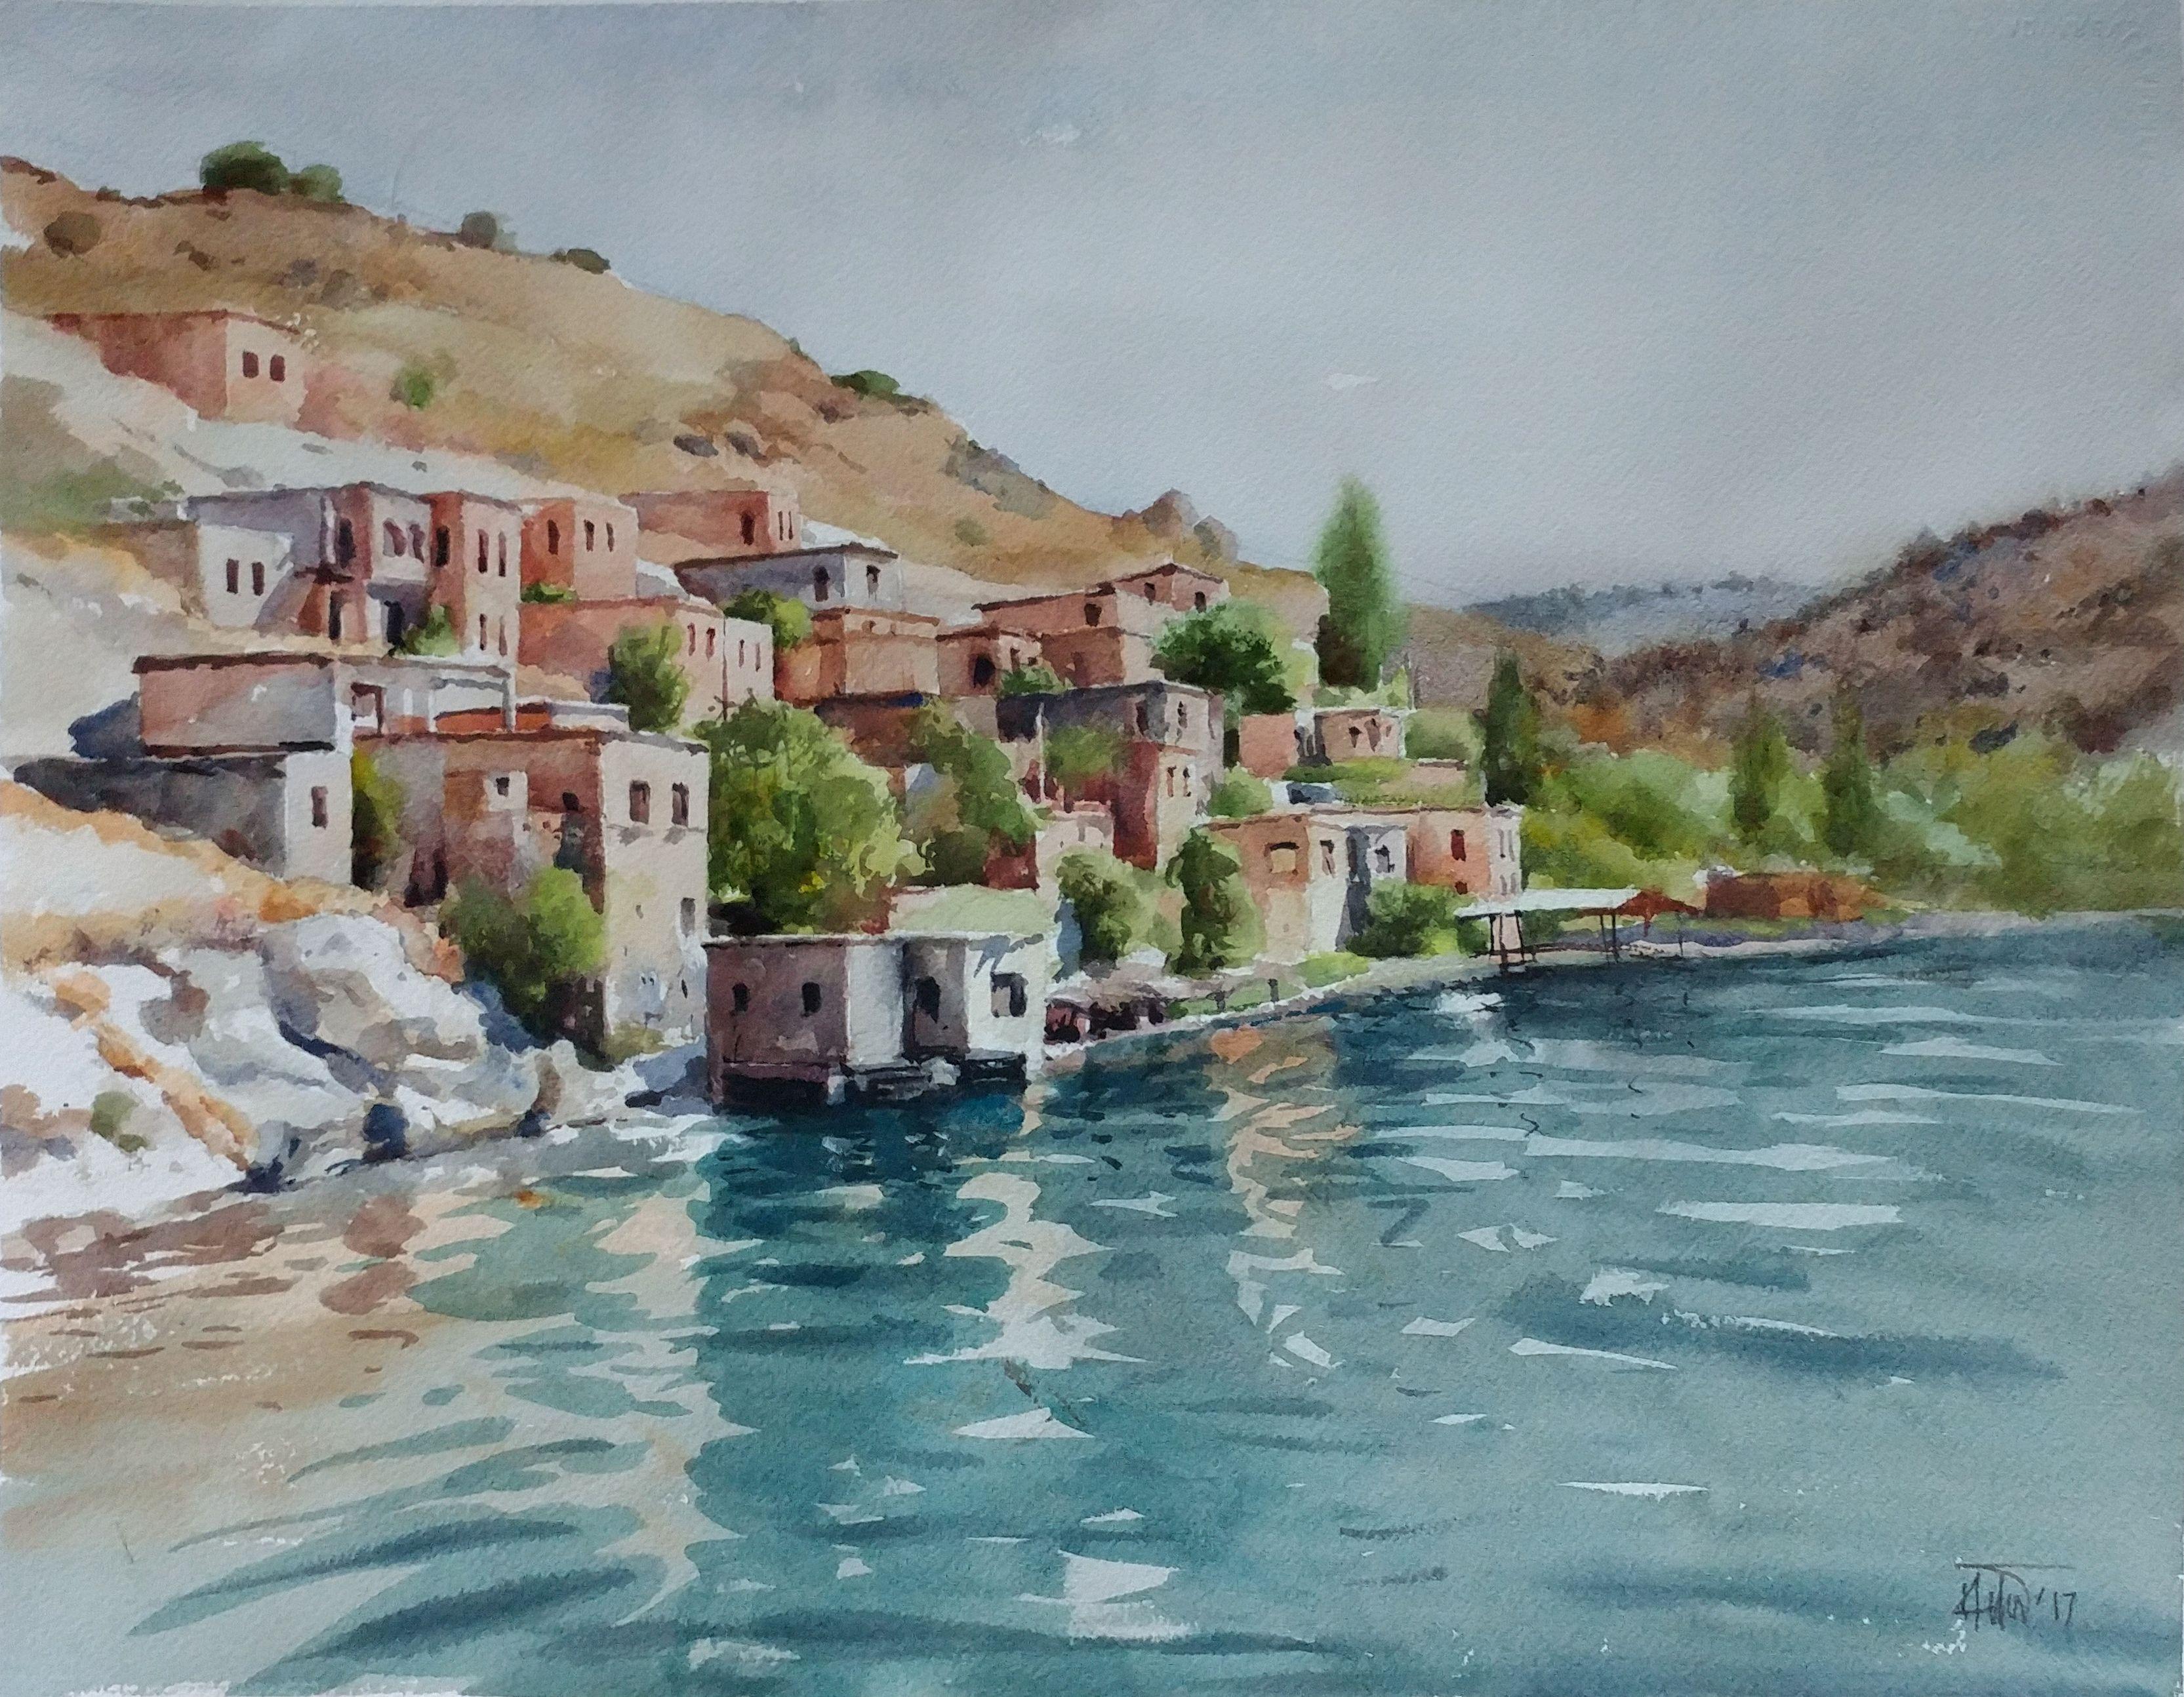 Gaziantep, Turkey, Painting, Watercolor on Watercolor Paper - Art by Helal Uddin